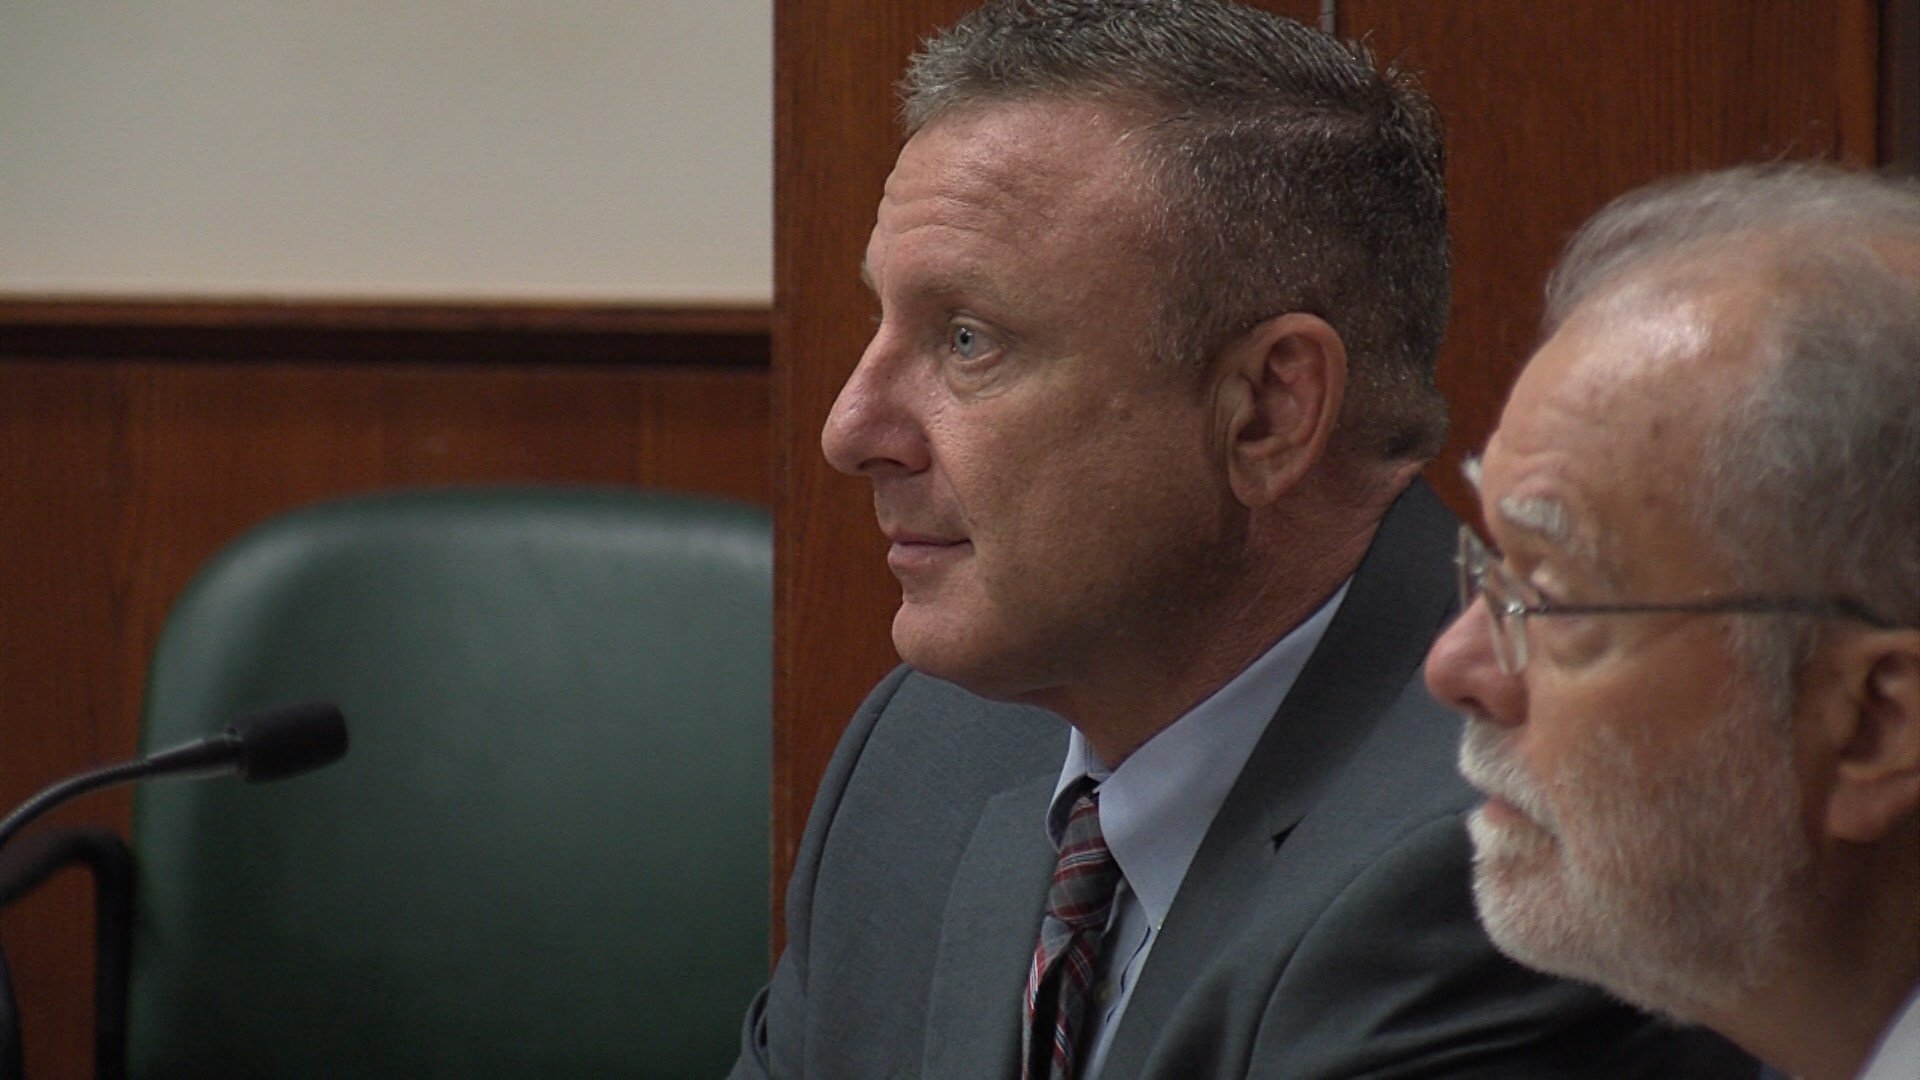 County Treasurer Andy Stebbing appears in court, faces five felony charges